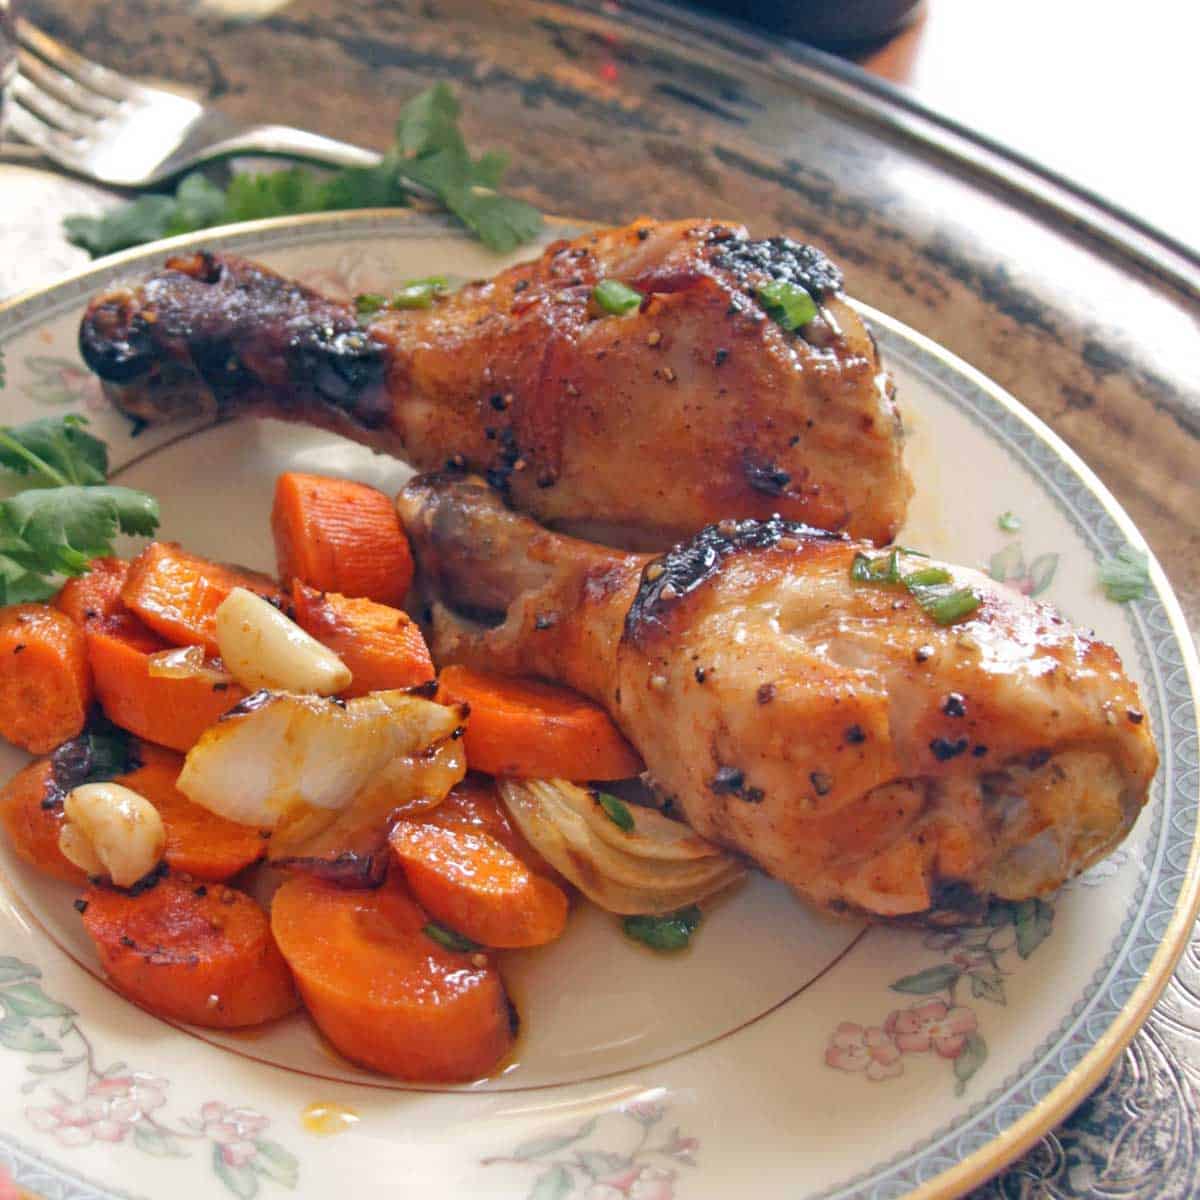 Perfectly Cooked Grilled Chicken Legs (Drumsticks) Every Single